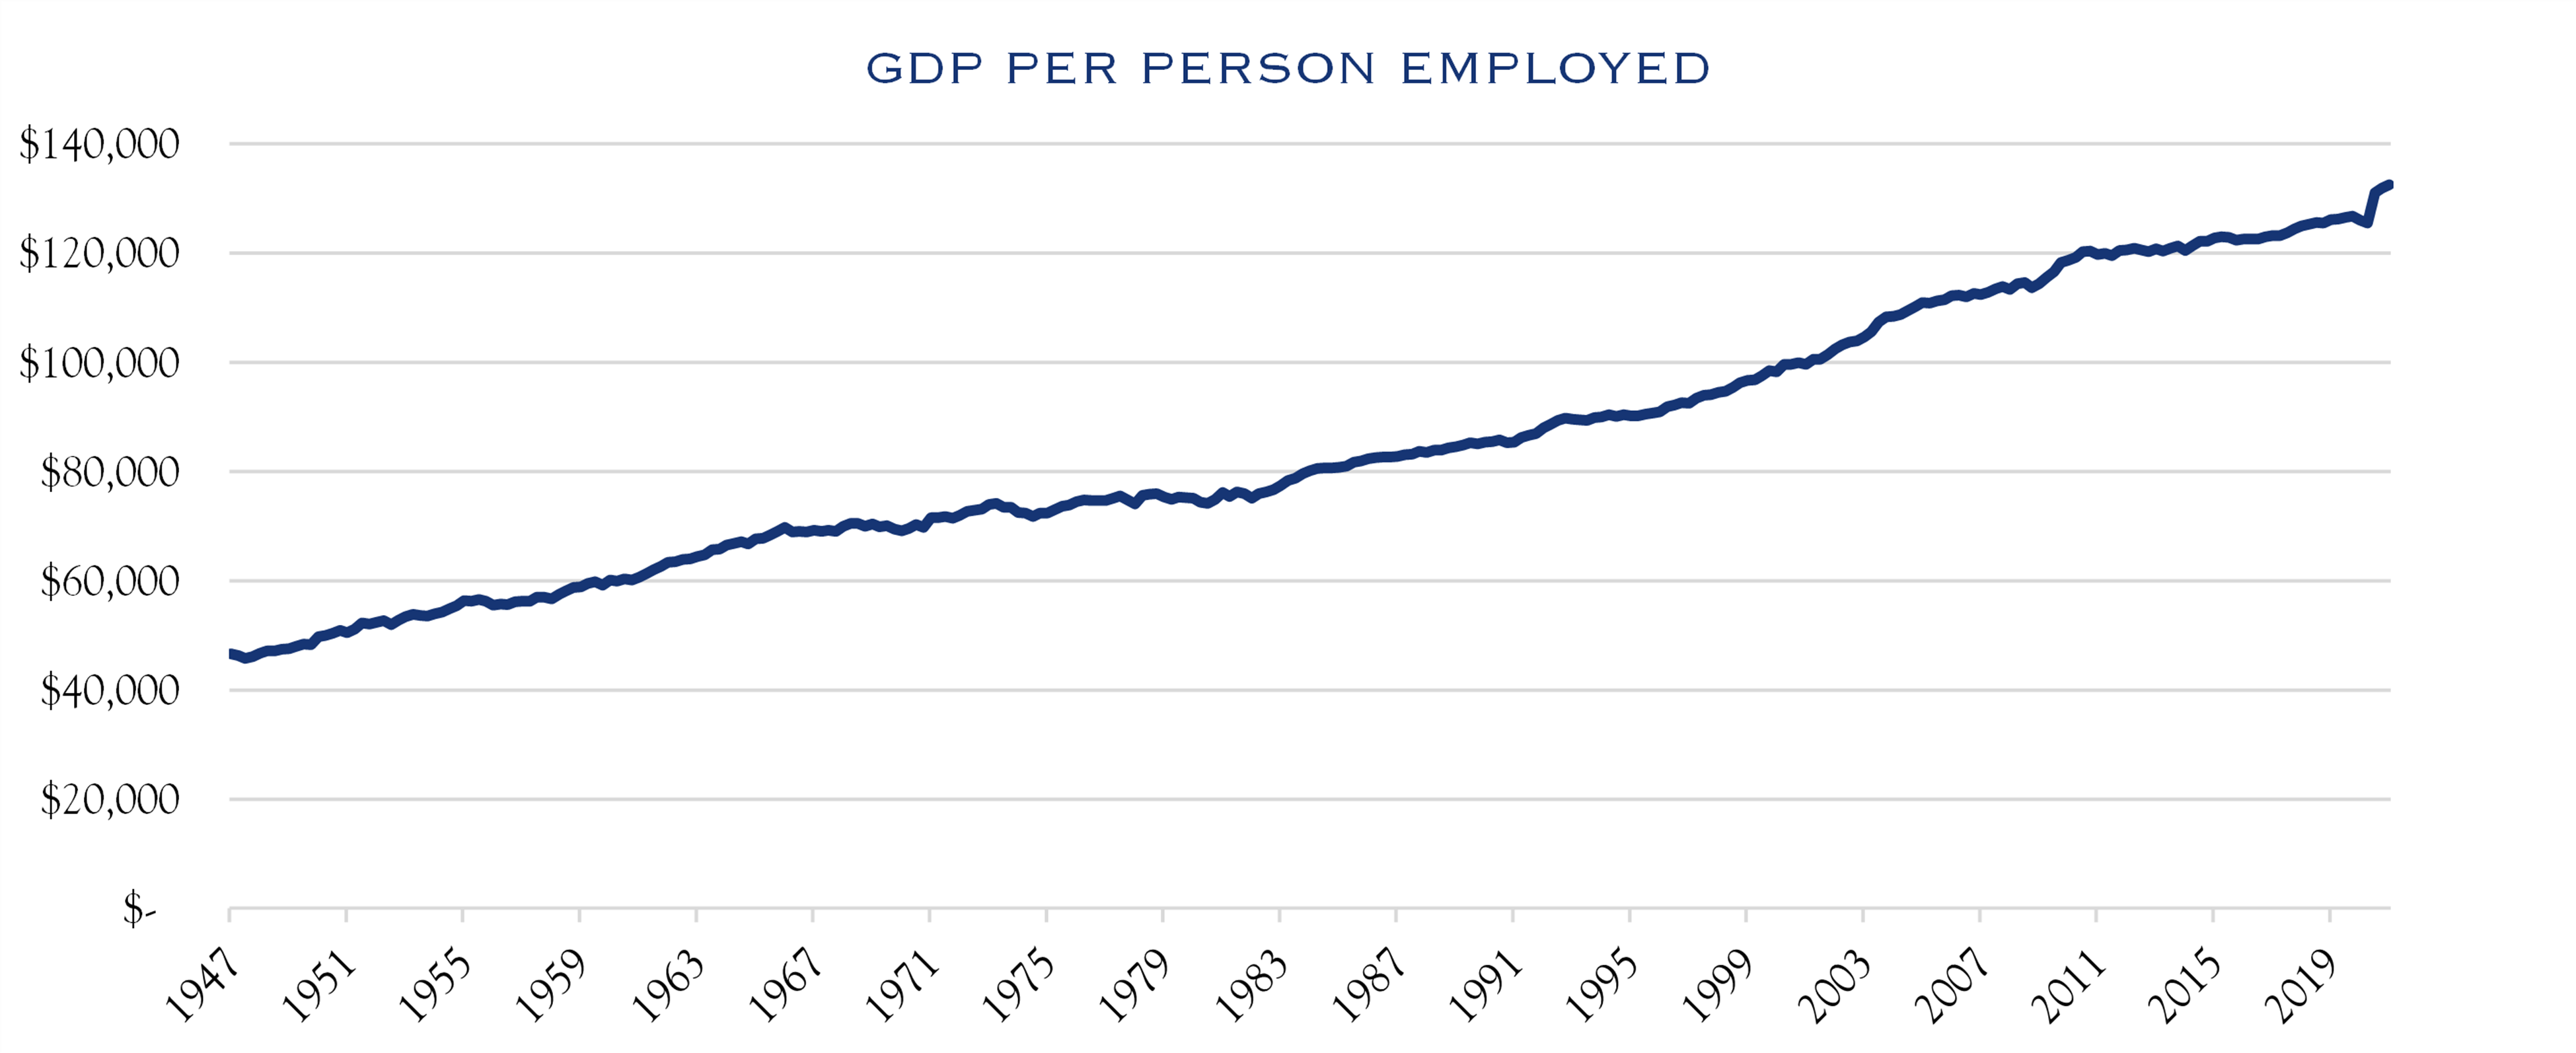 GDP per person employed